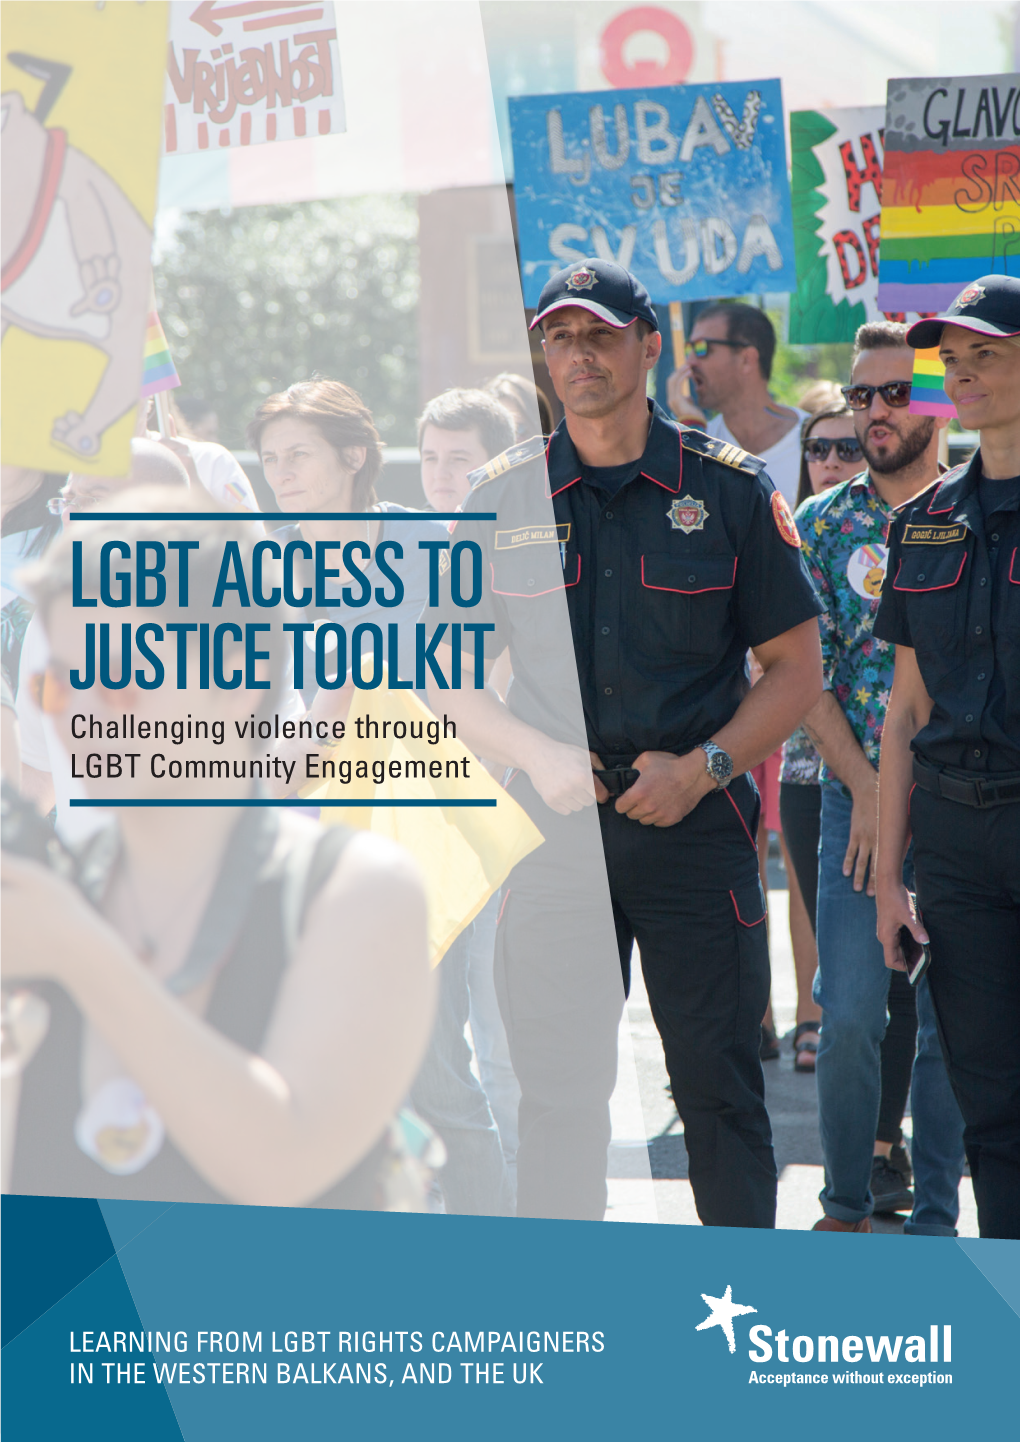 LGBT ACCESS to JUSTICE TOOLKIT Challenging Violence Through LGBT Community Engagement